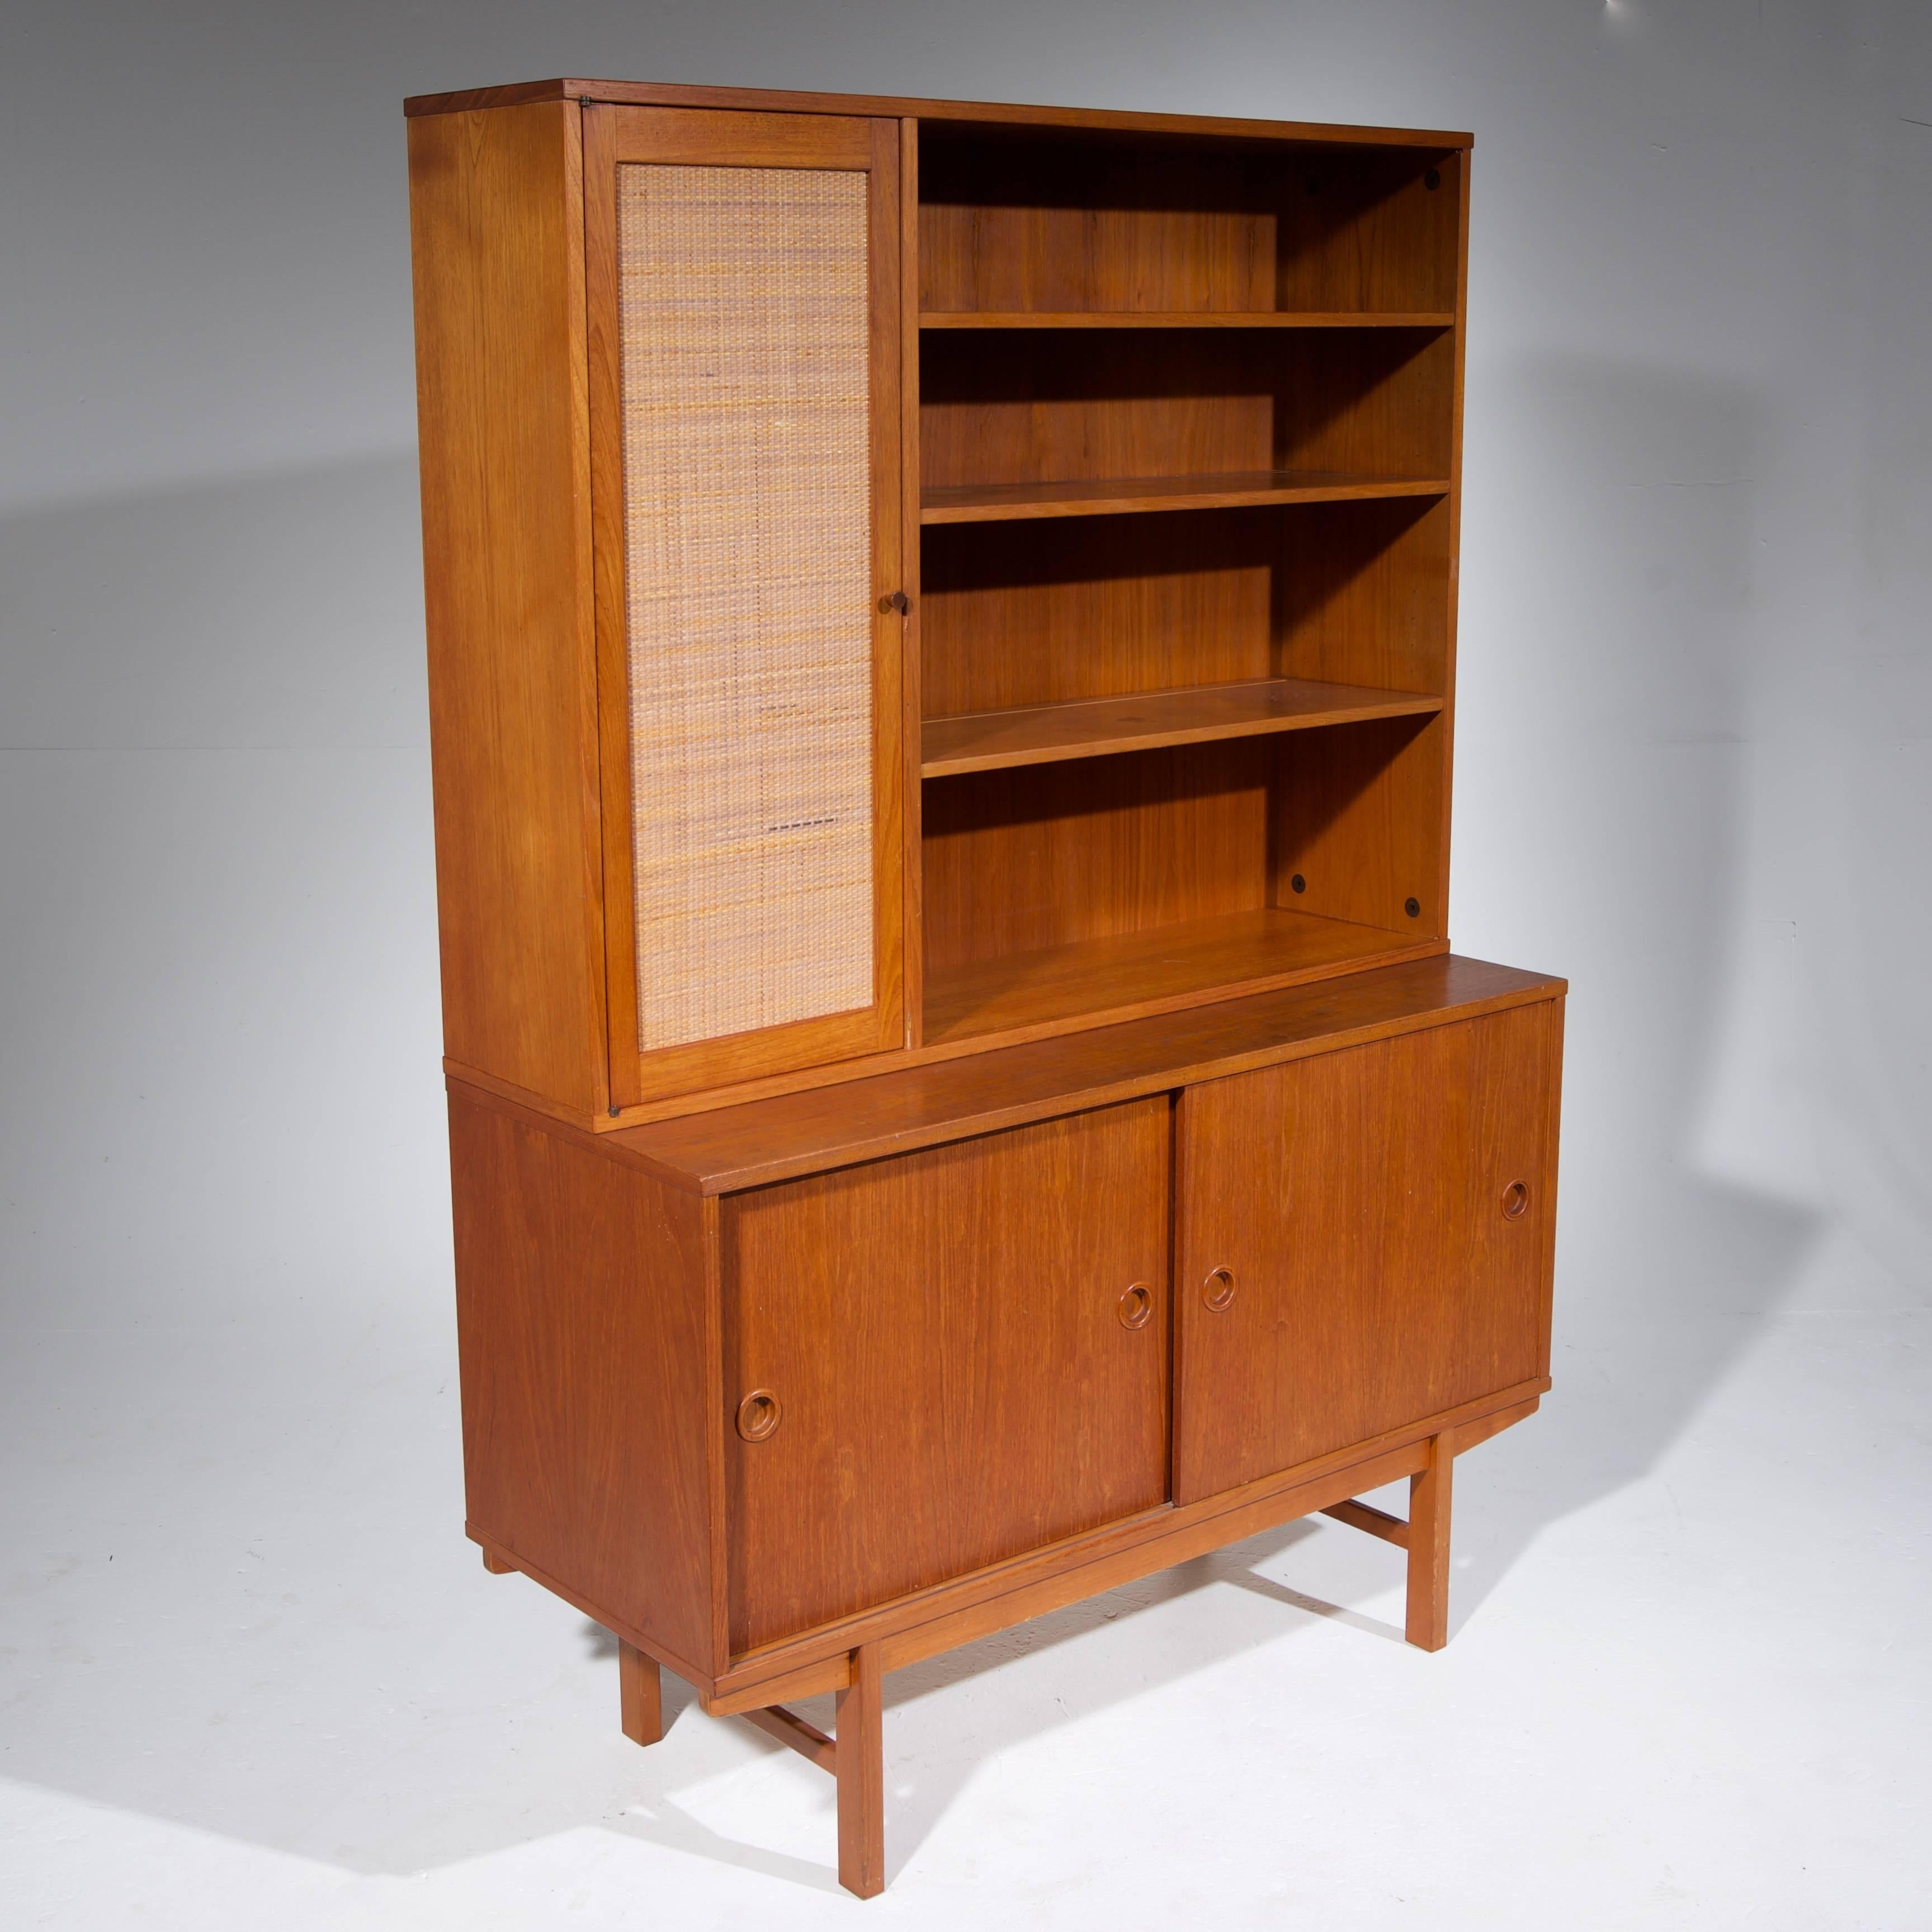 Mid-20th Century Folke Ohlsson Teak Credenza and Shelving Cabinet for DUX